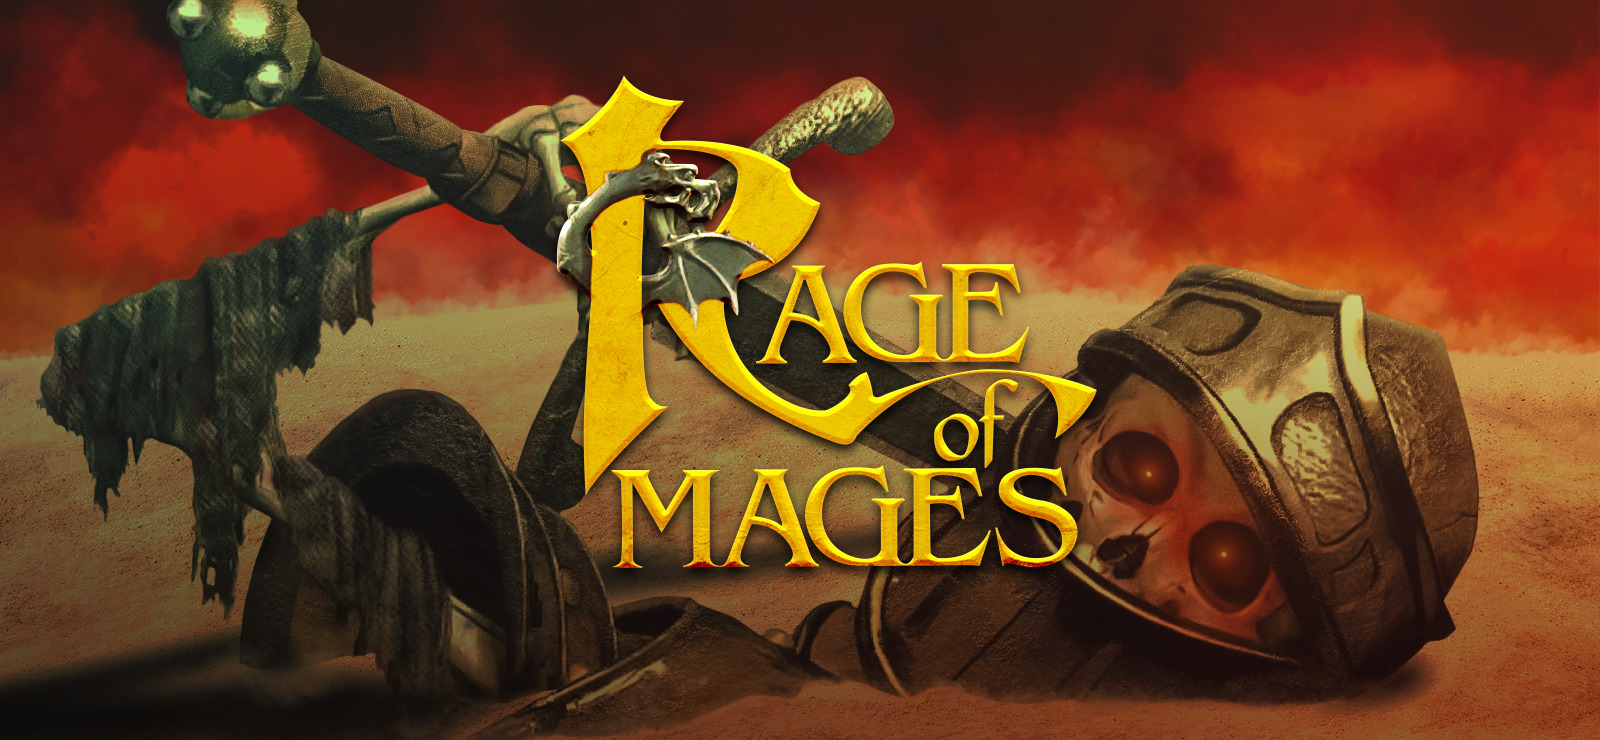 download rage of mages ii